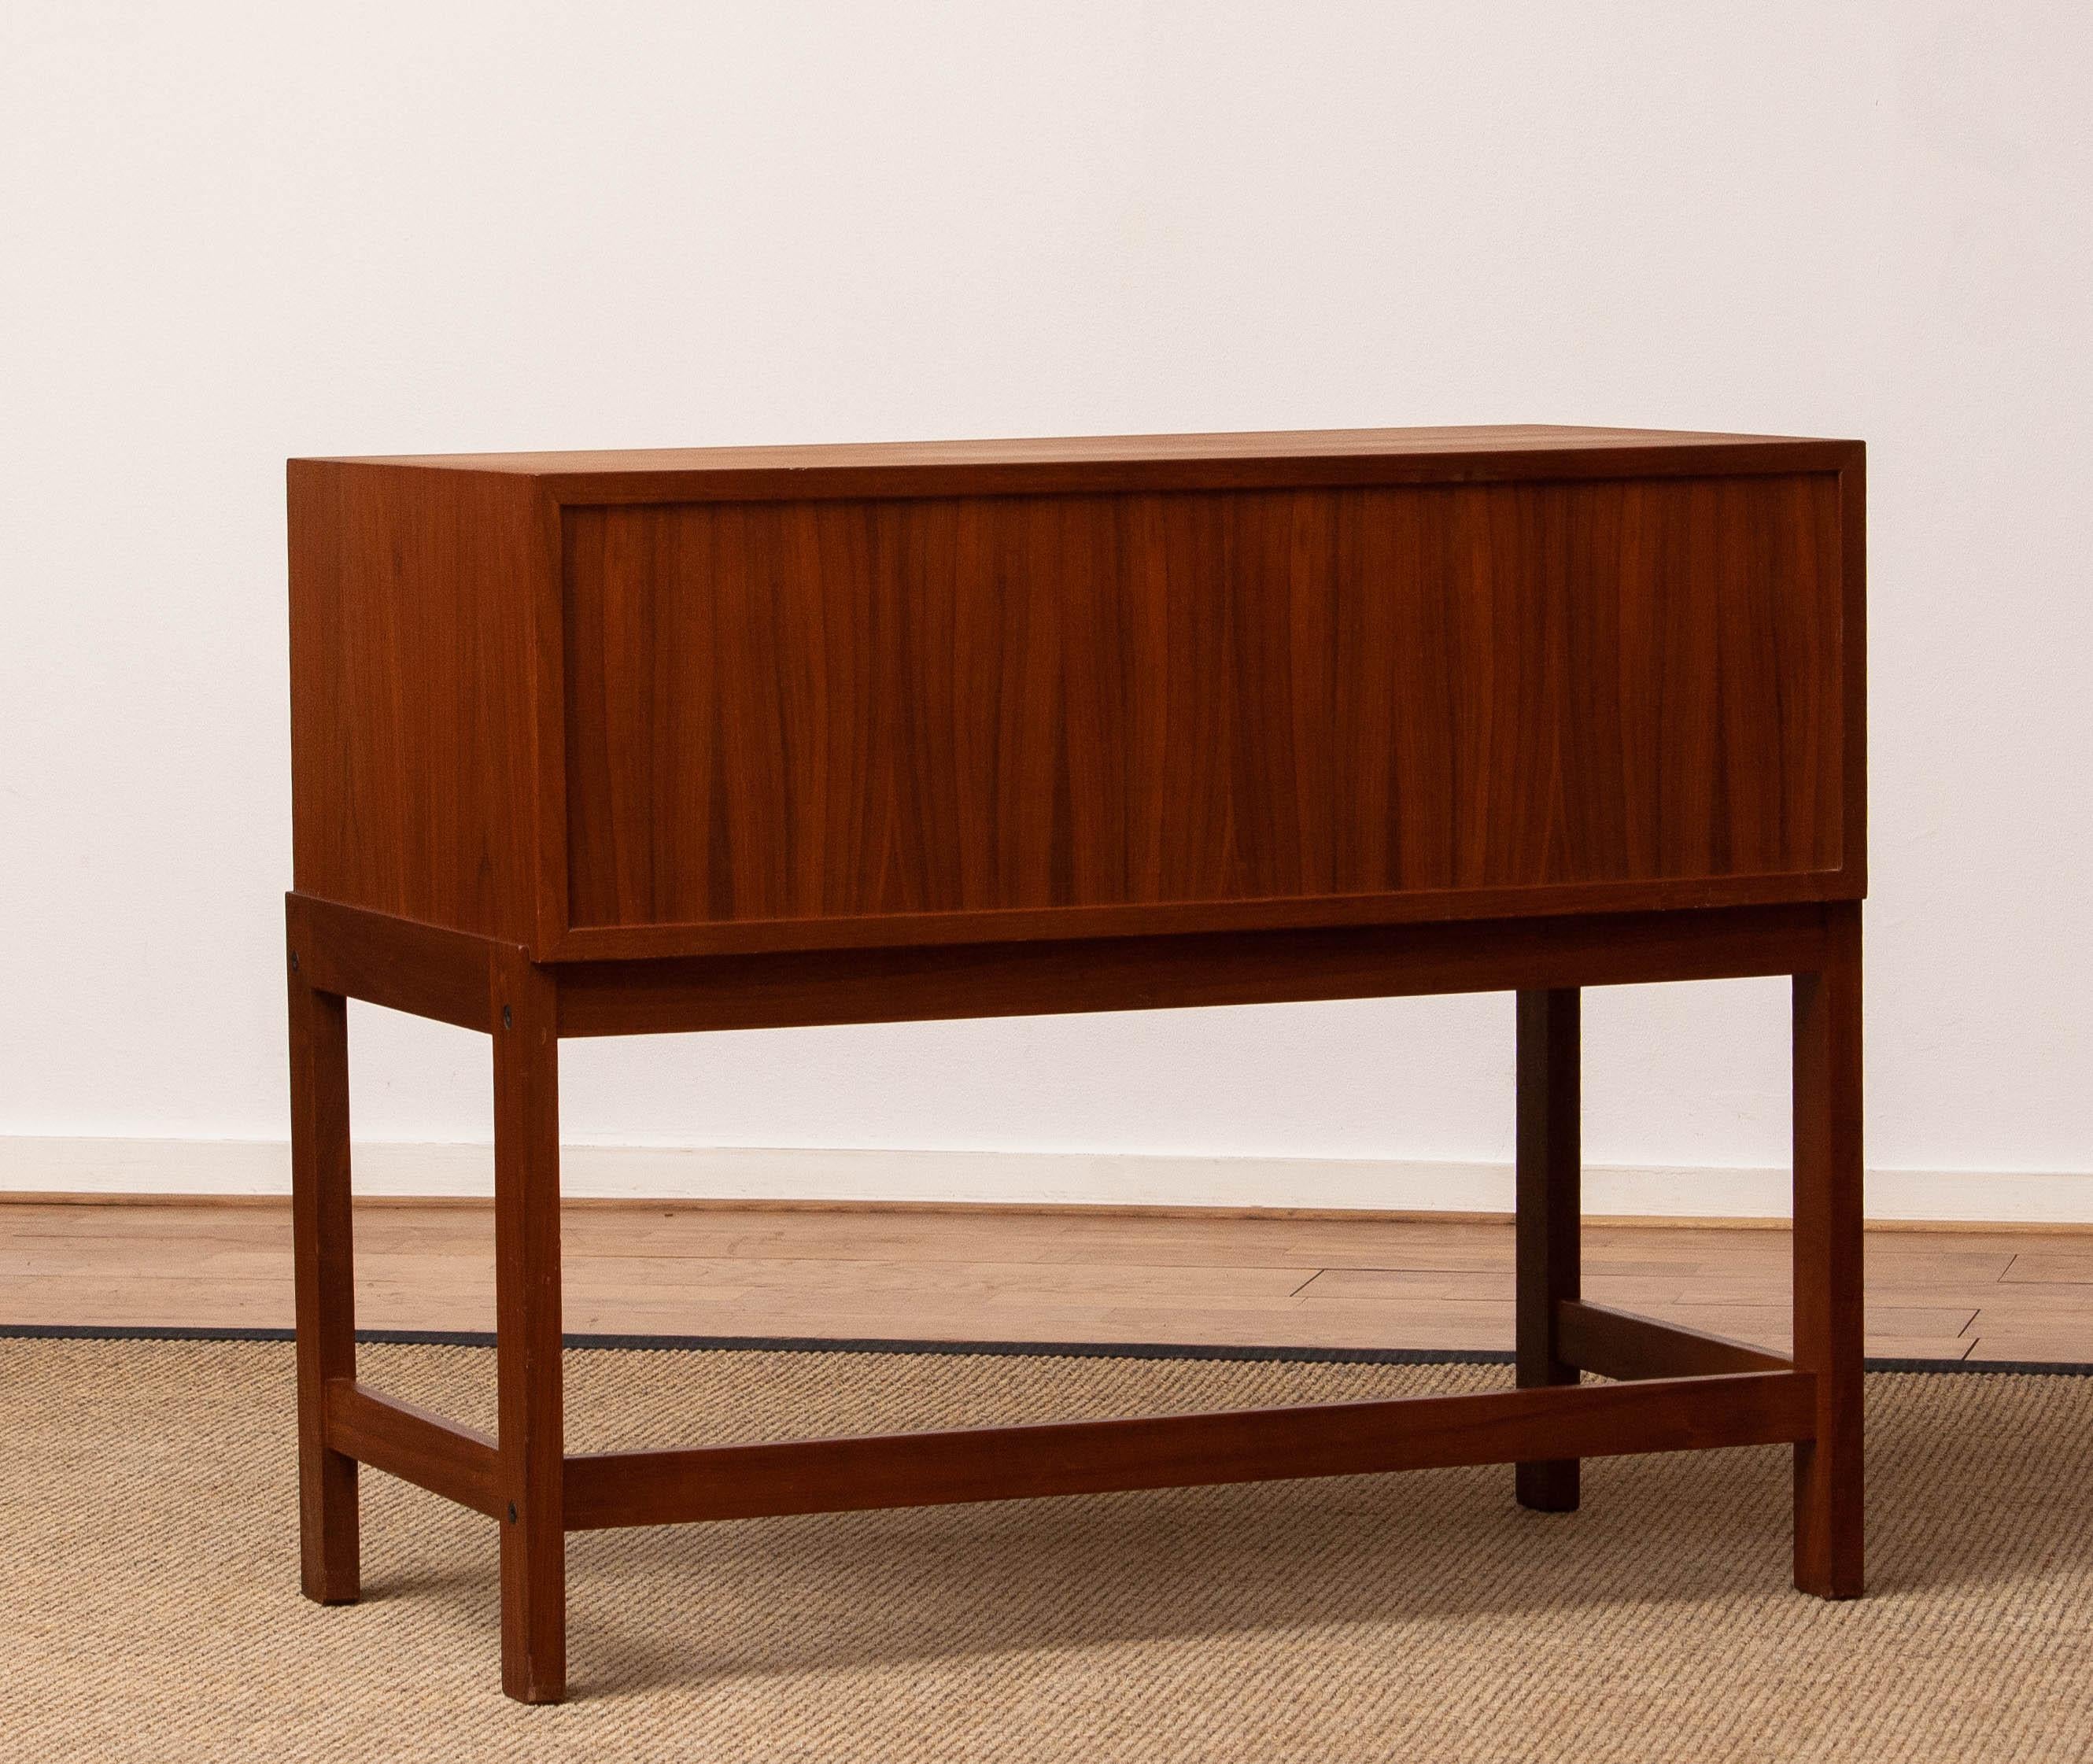 1960's Teak 'Free Standing' Small Sideboard / Small Credensaz from Denmark For Sale 3